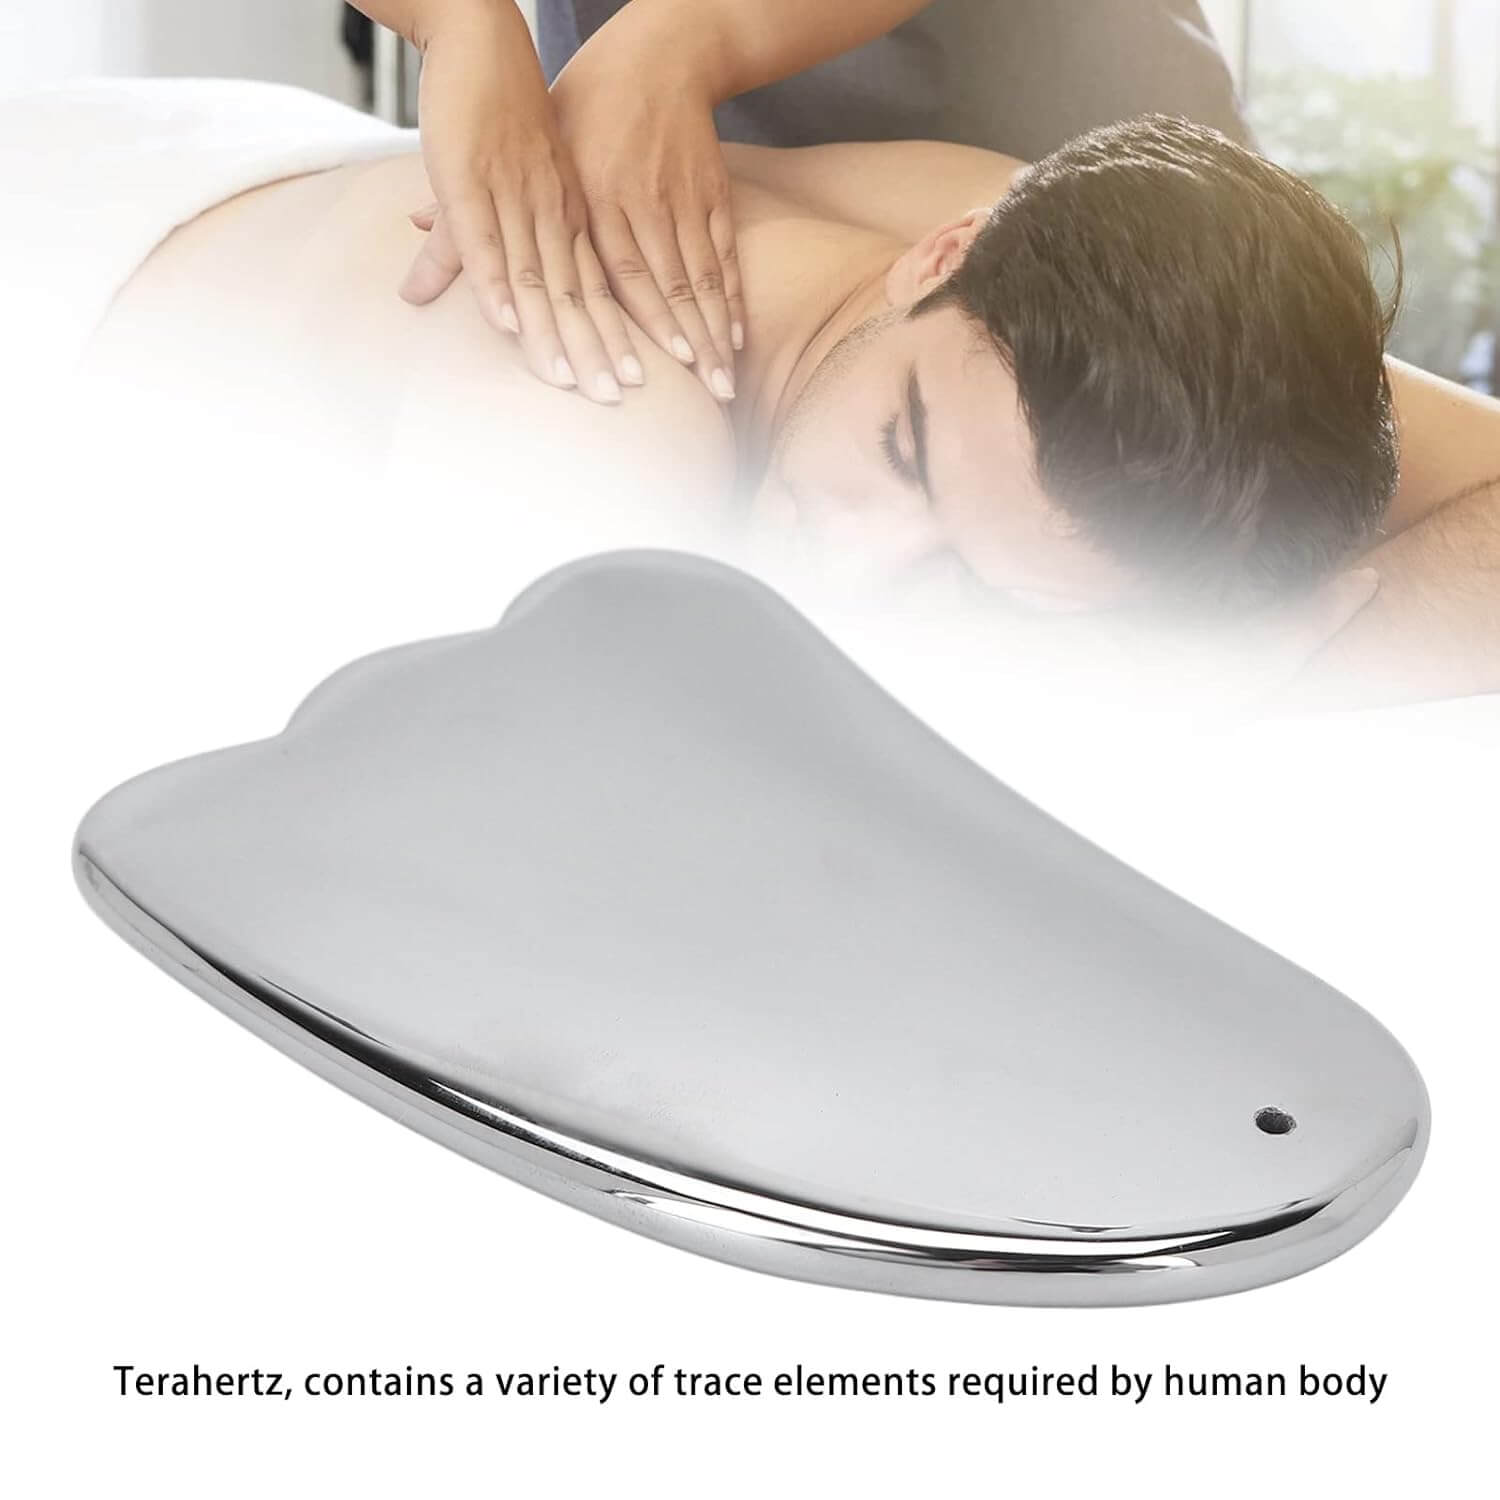 The The Terahertz Gua Sha tool. A man getting a back massage in the background.